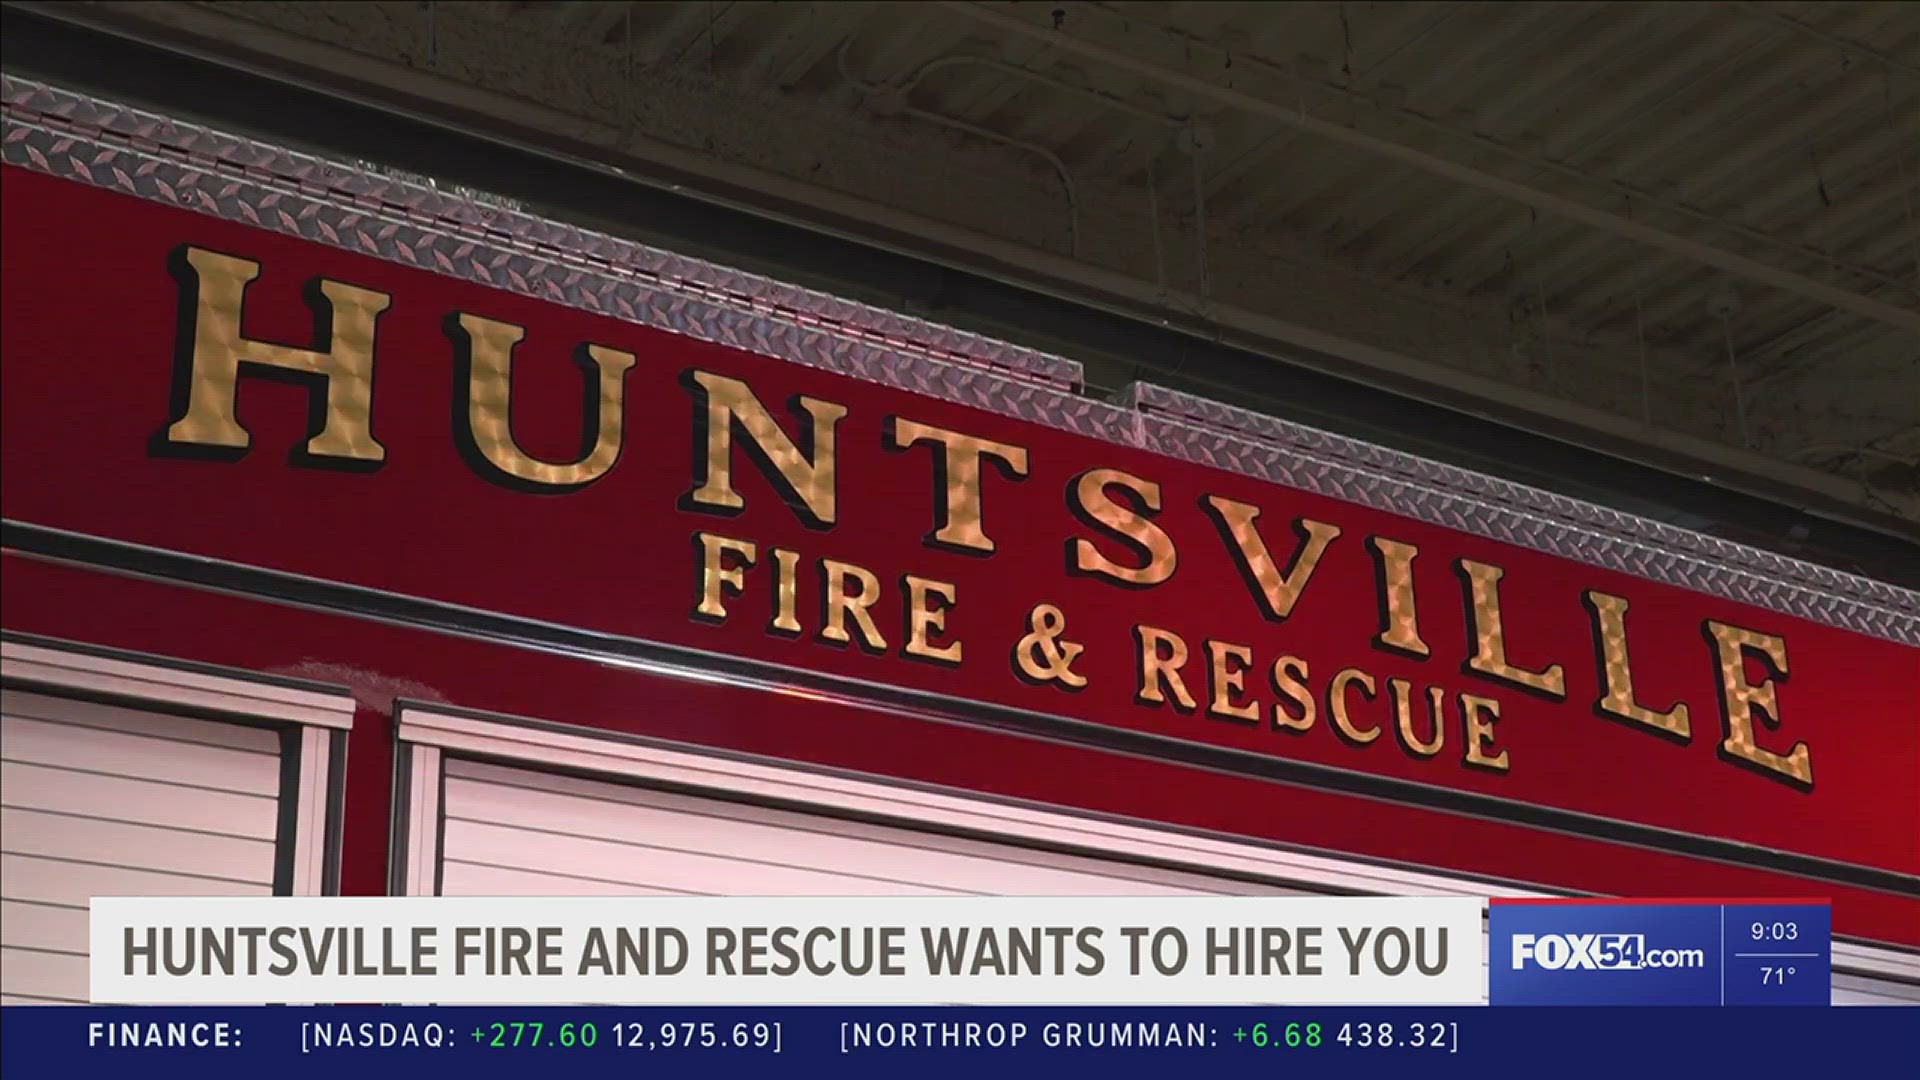 Through June 2, Huntsville Fire & Rescue is actively recruiting locals to become firefighters as the need for protection grows along with the city limits.